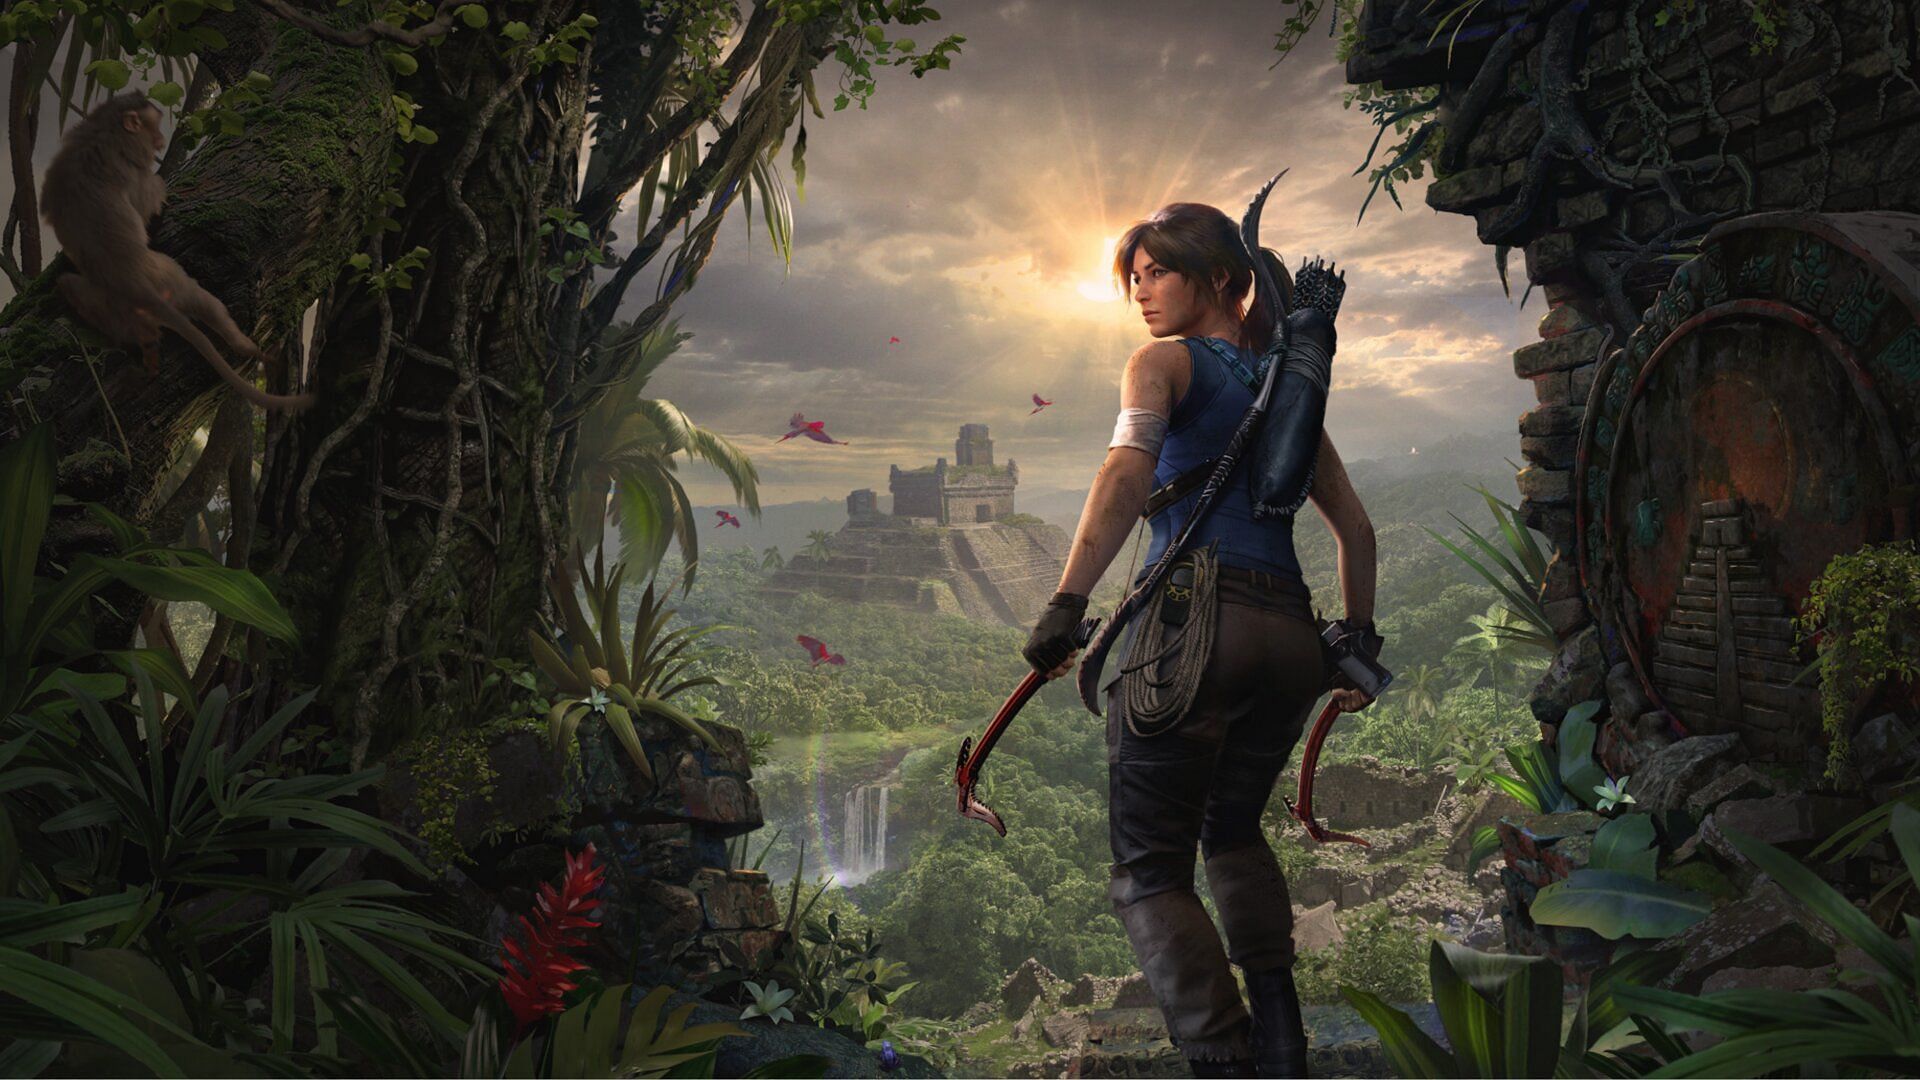 Tomb Raider offers players a view into the life of adventure-minded archaeologist Lara Croft and remains one of the best games like Prince of Persia. (Image via Crystal Dynamics)